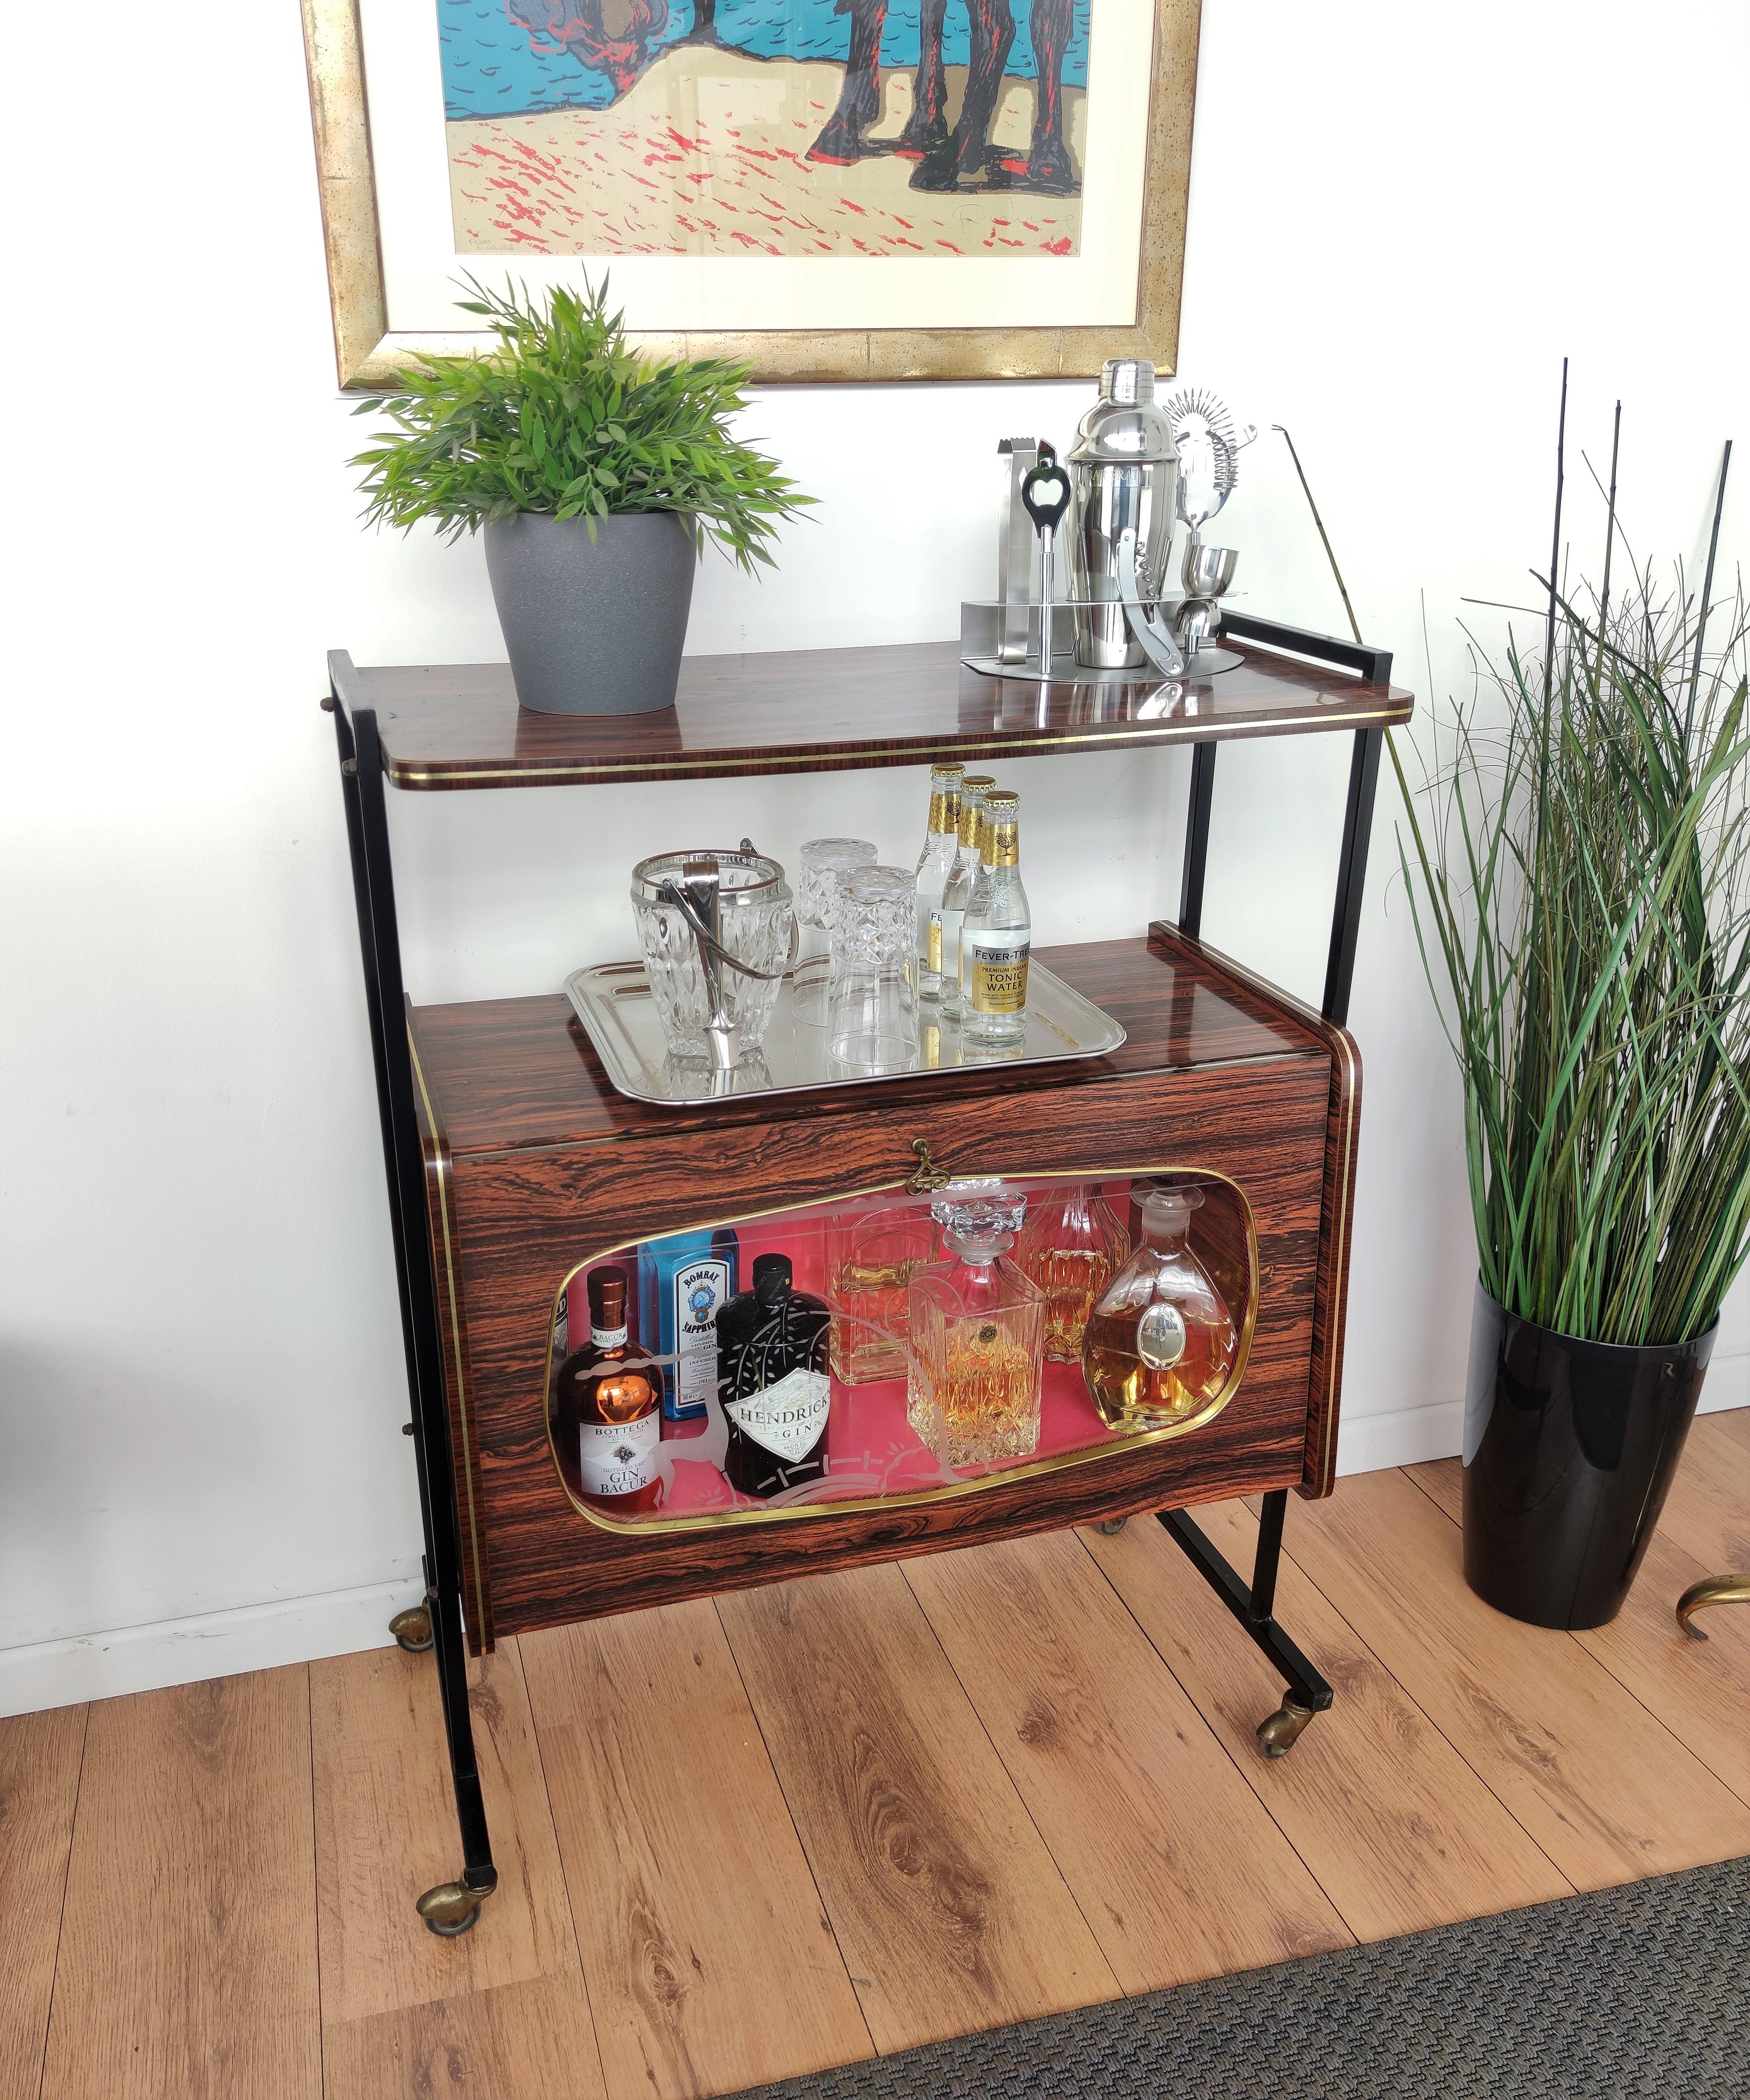 Very elegant Italian midcentury two-tier greatly shaped dry bar cabinet cart, in walnut wood and brass line details. The beautiful front flip brass and decorated glass door allow to see the amazing interior part lined in pinkish color, all standing